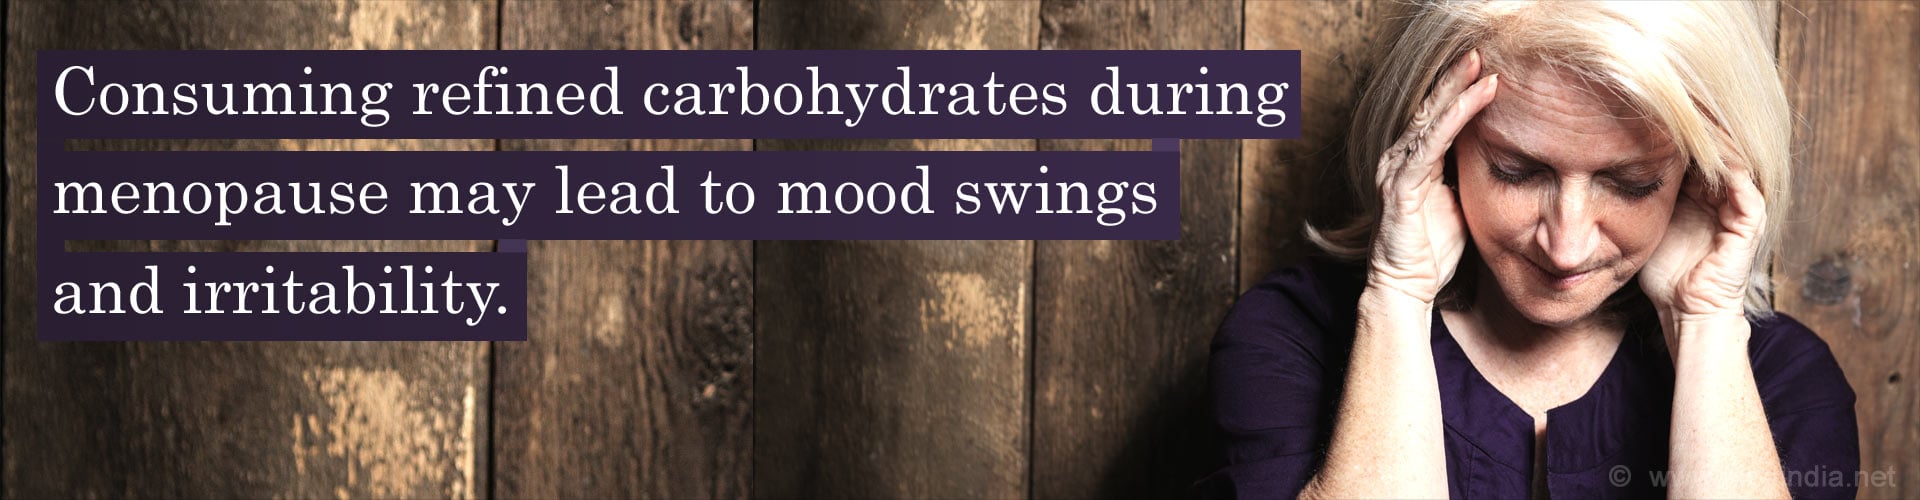 Consuming refined carbohydrates during menopause may lead to mood swings and irritability.